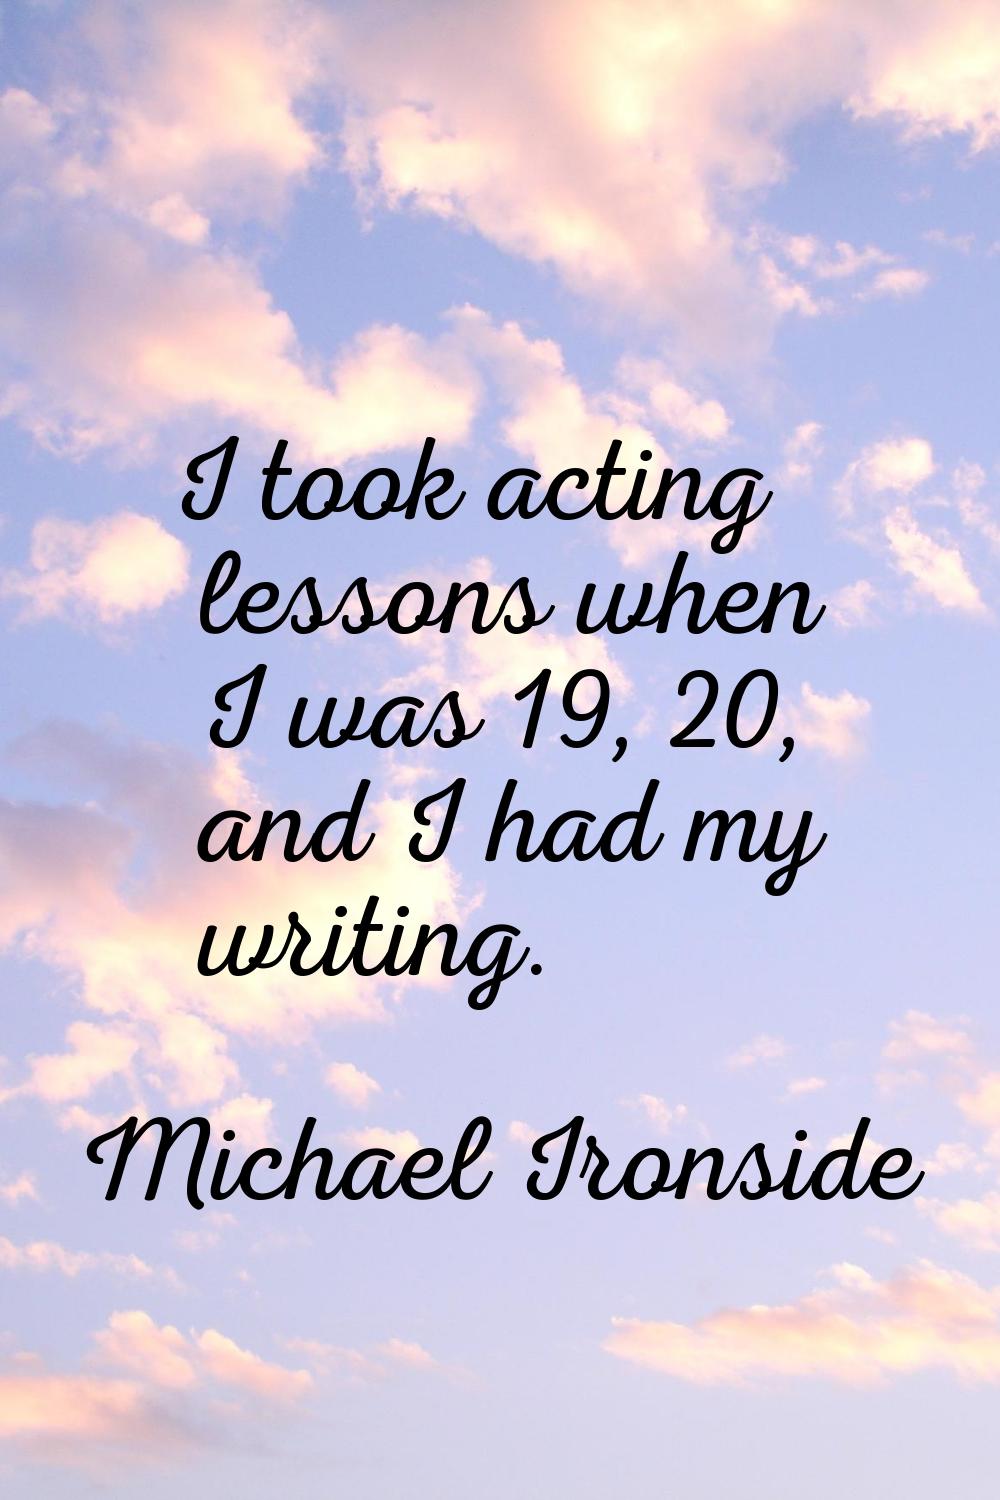 I took acting lessons when I was 19, 20, and I had my writing.